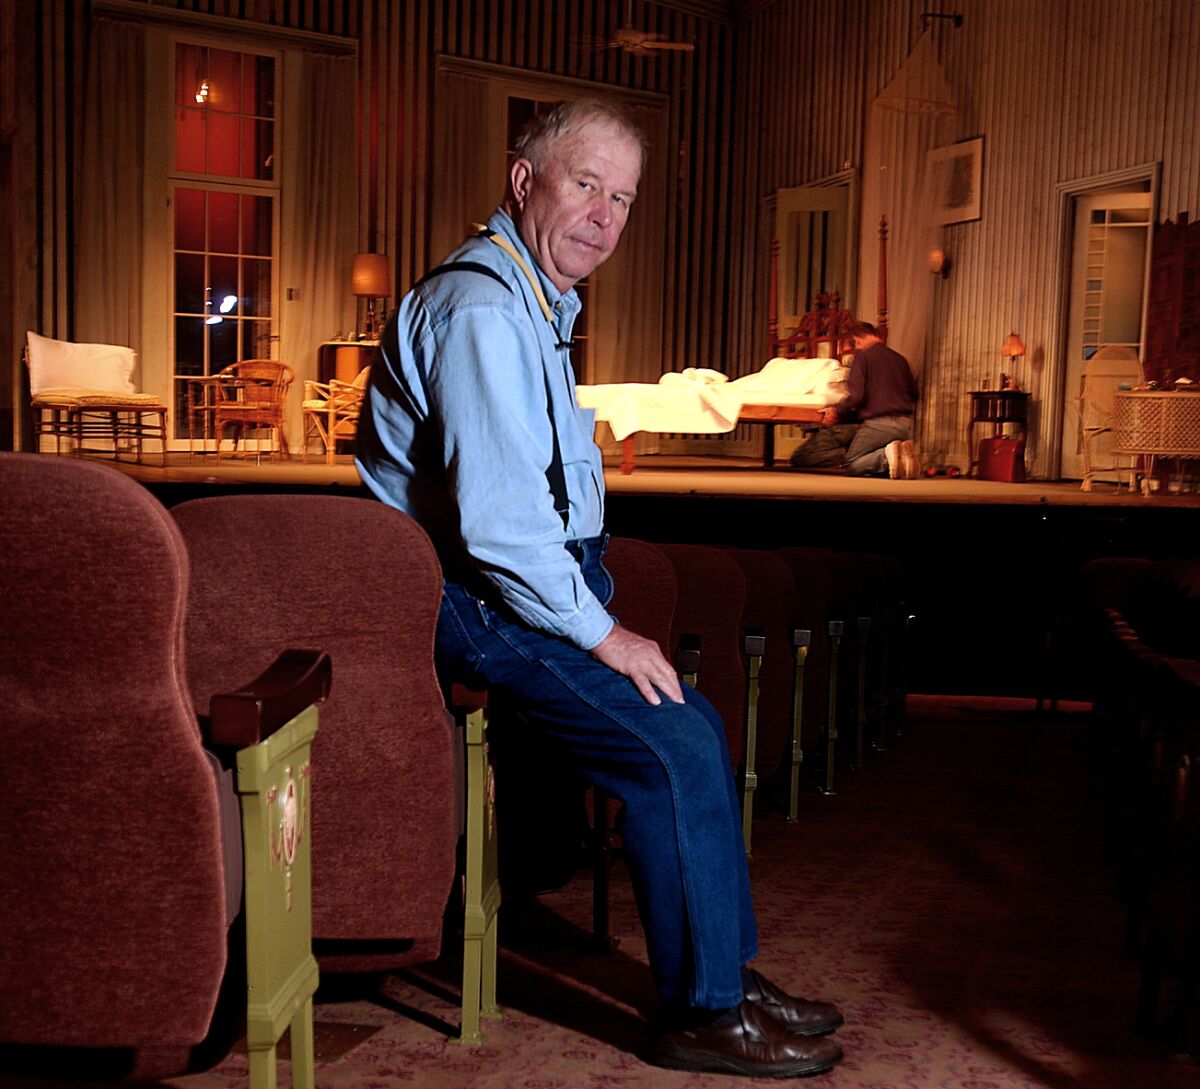 Ned Beatty perches on the arm of a theater seat in front of a stage dressed for a play.